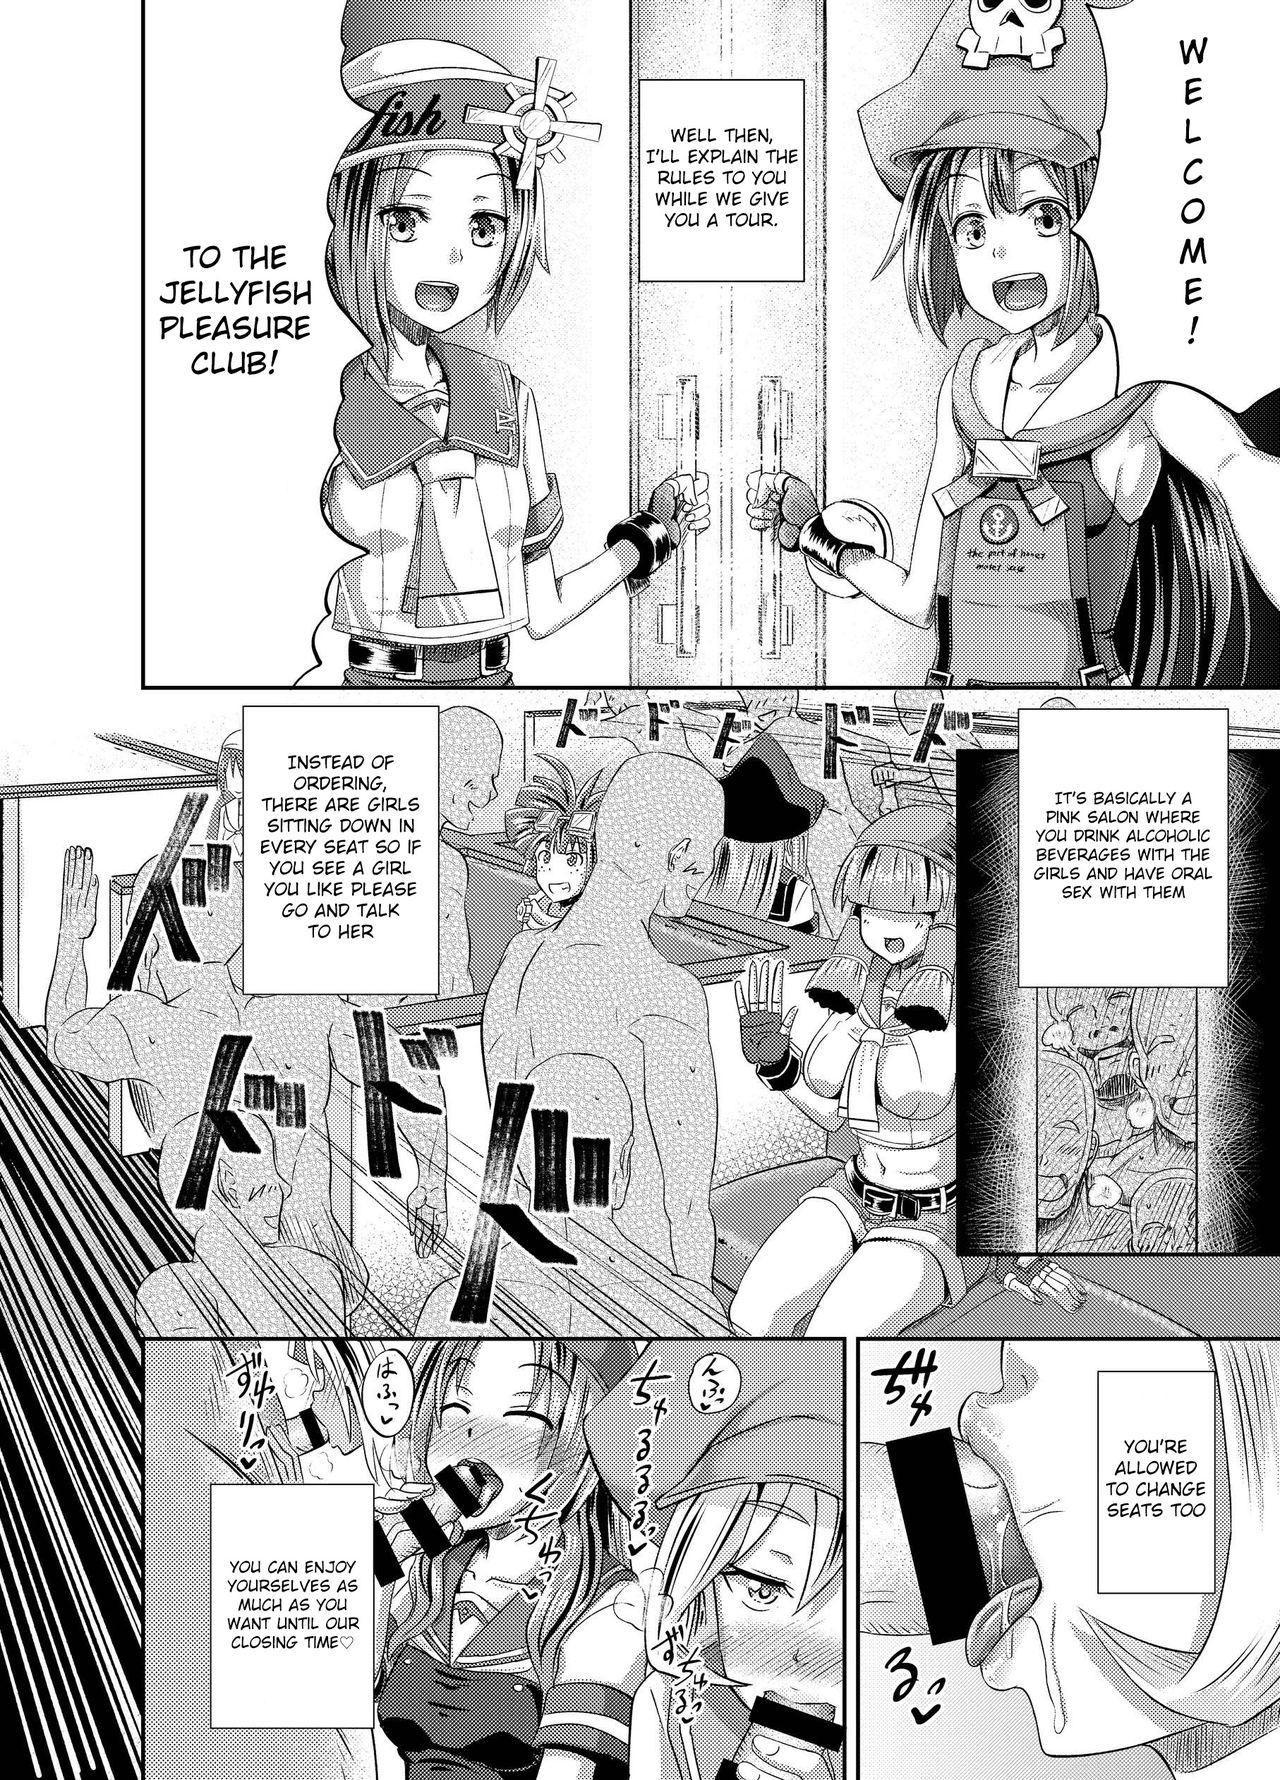 Lesbos Jellyfish Kaizokudan e Youkoso! | Welcome to The Jellyfish Pleasure Club! - Guilty gear Flogging - Page 3